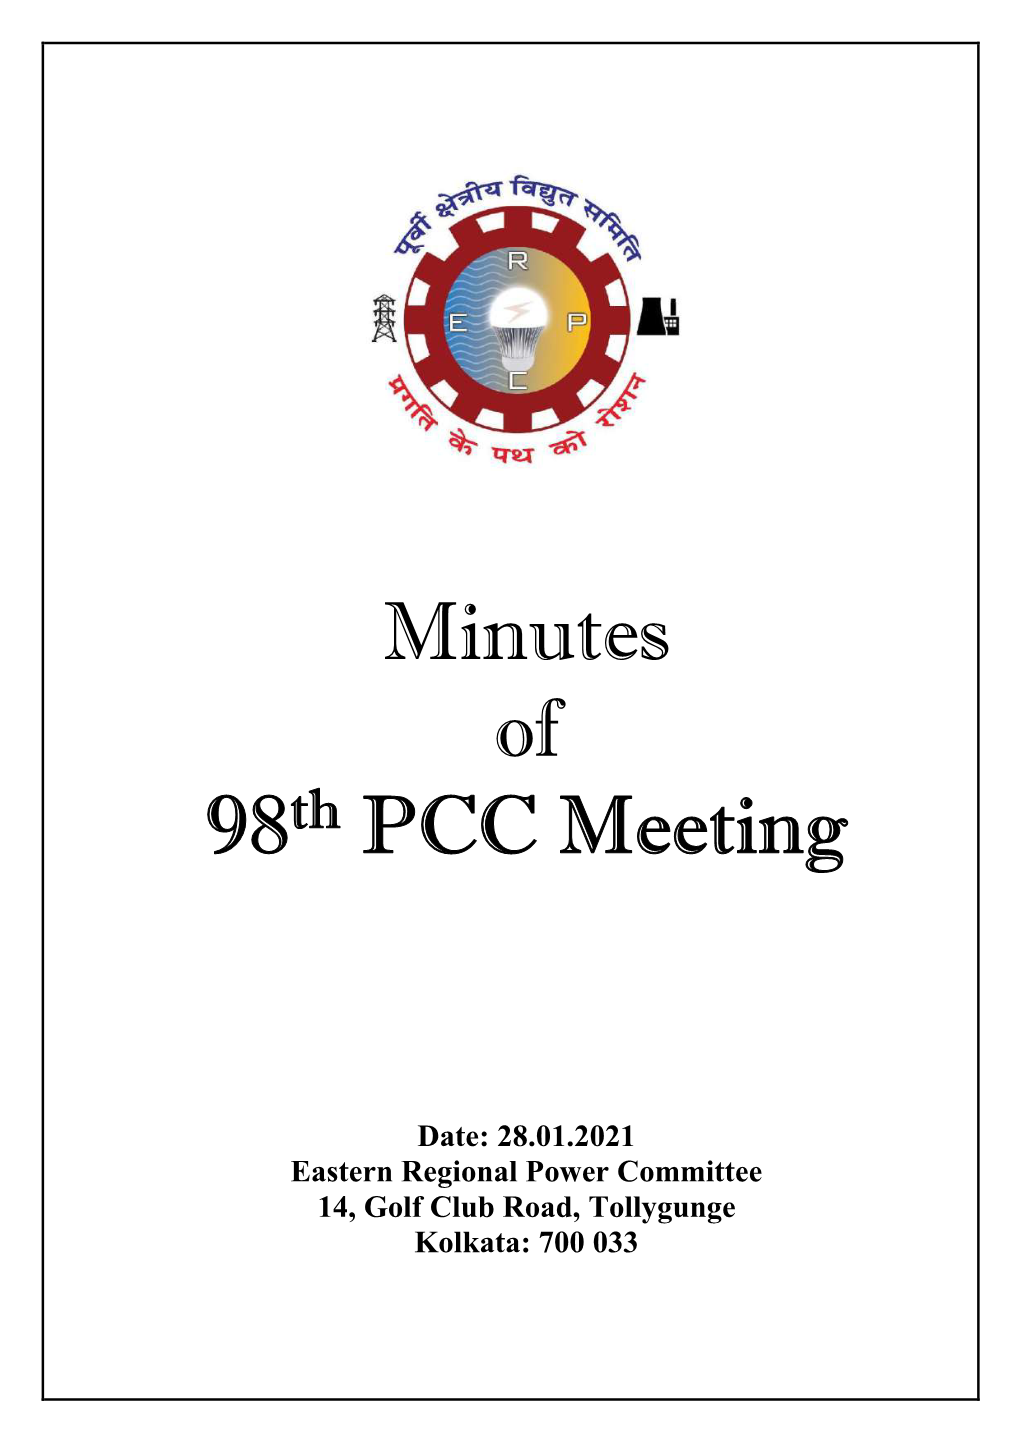 Minutes of 98Th PCC Meeting